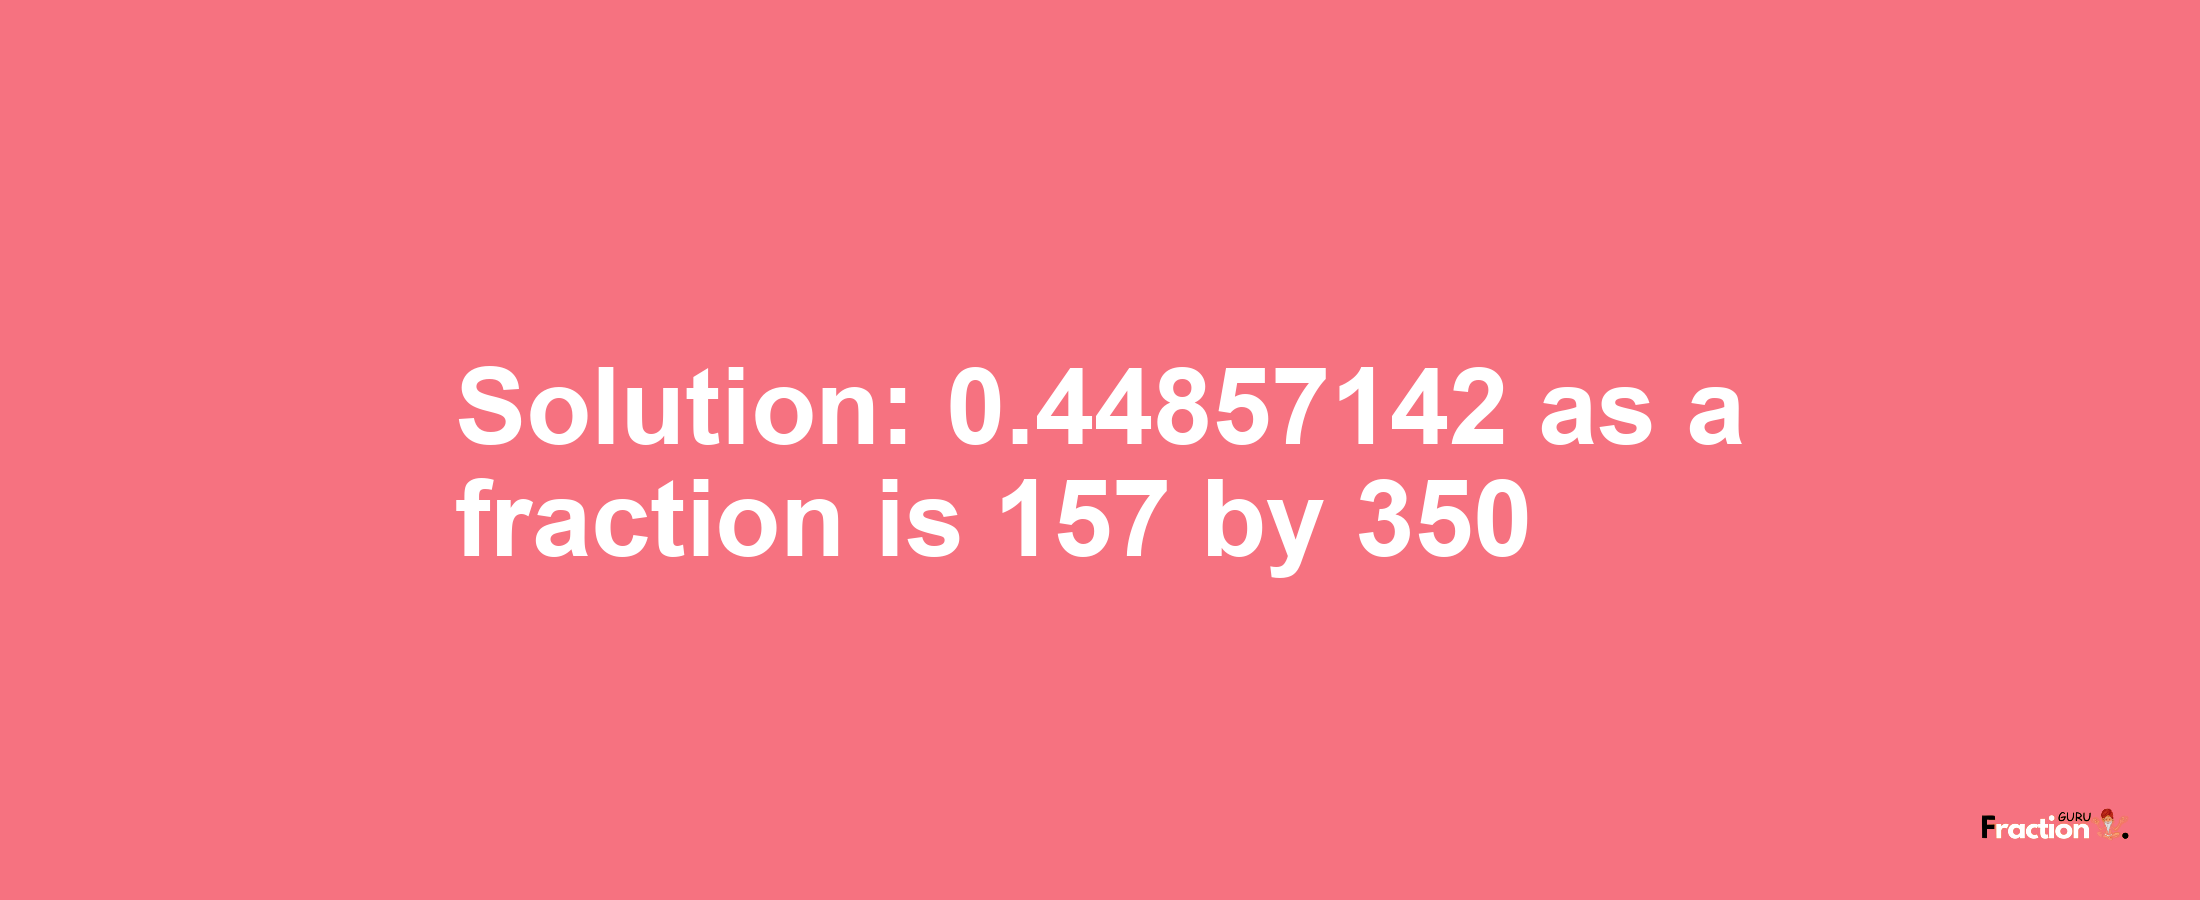 Solution:0.44857142 as a fraction is 157/350